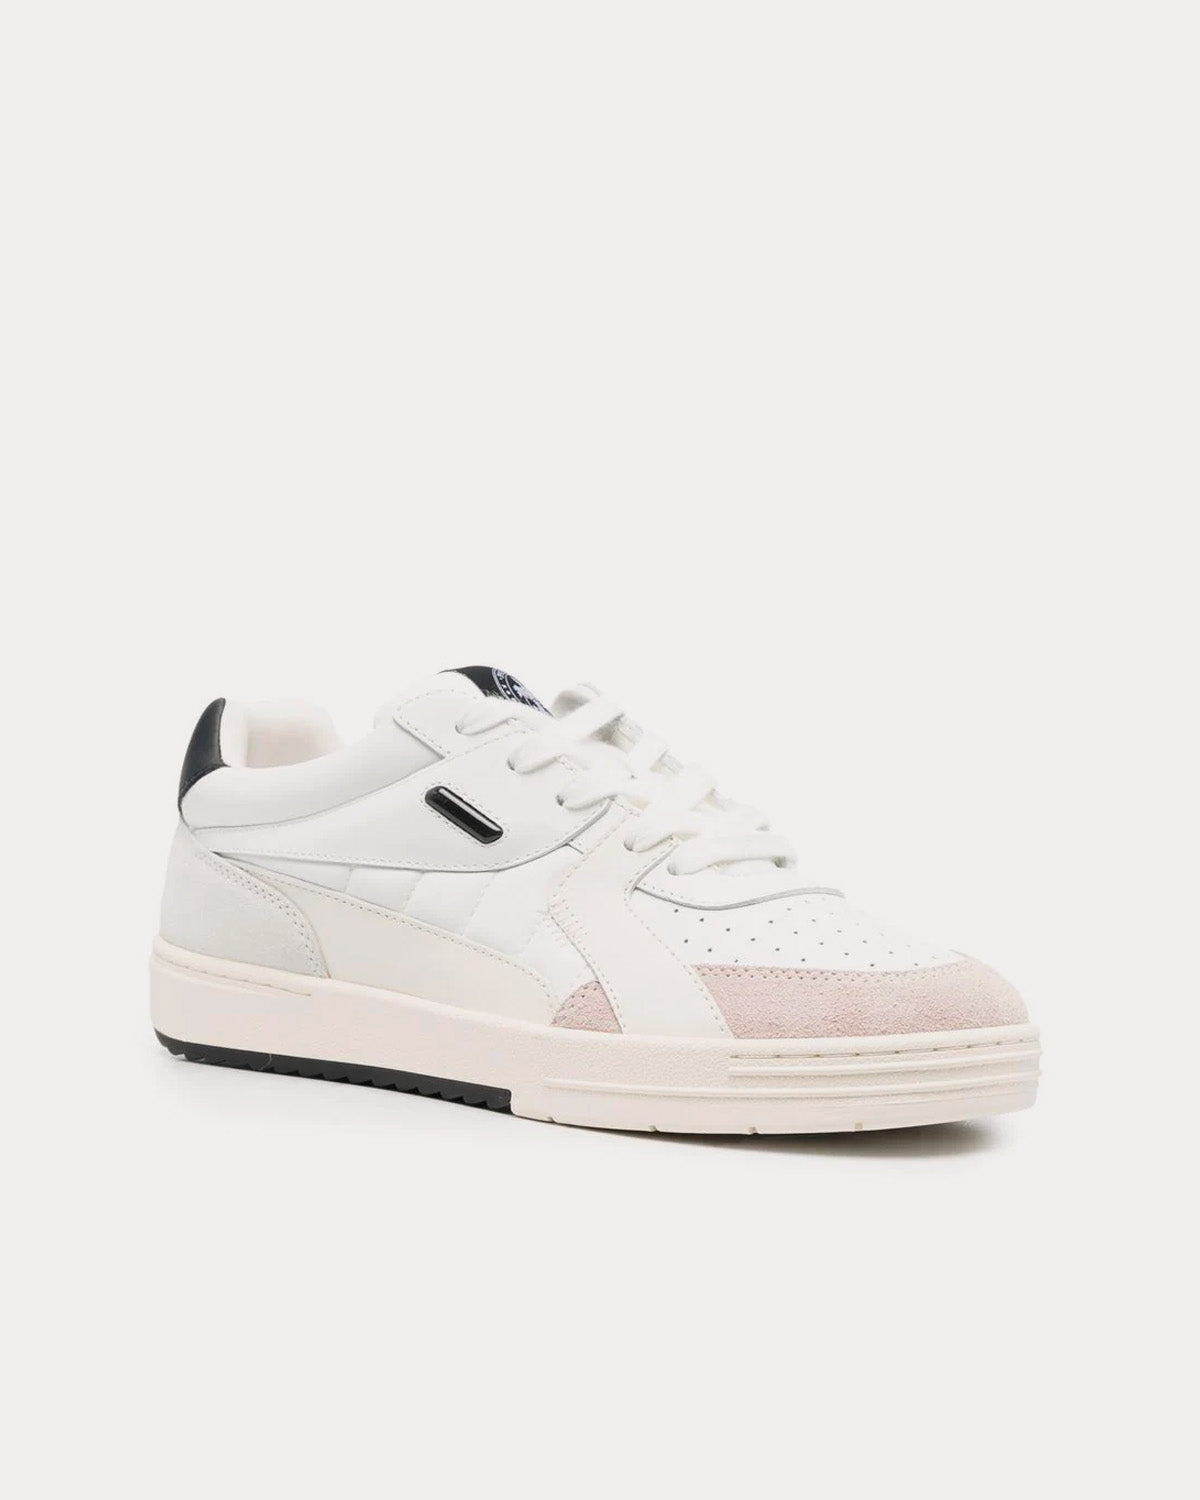 Palm Angels - University White / Black Low Top Sneakers